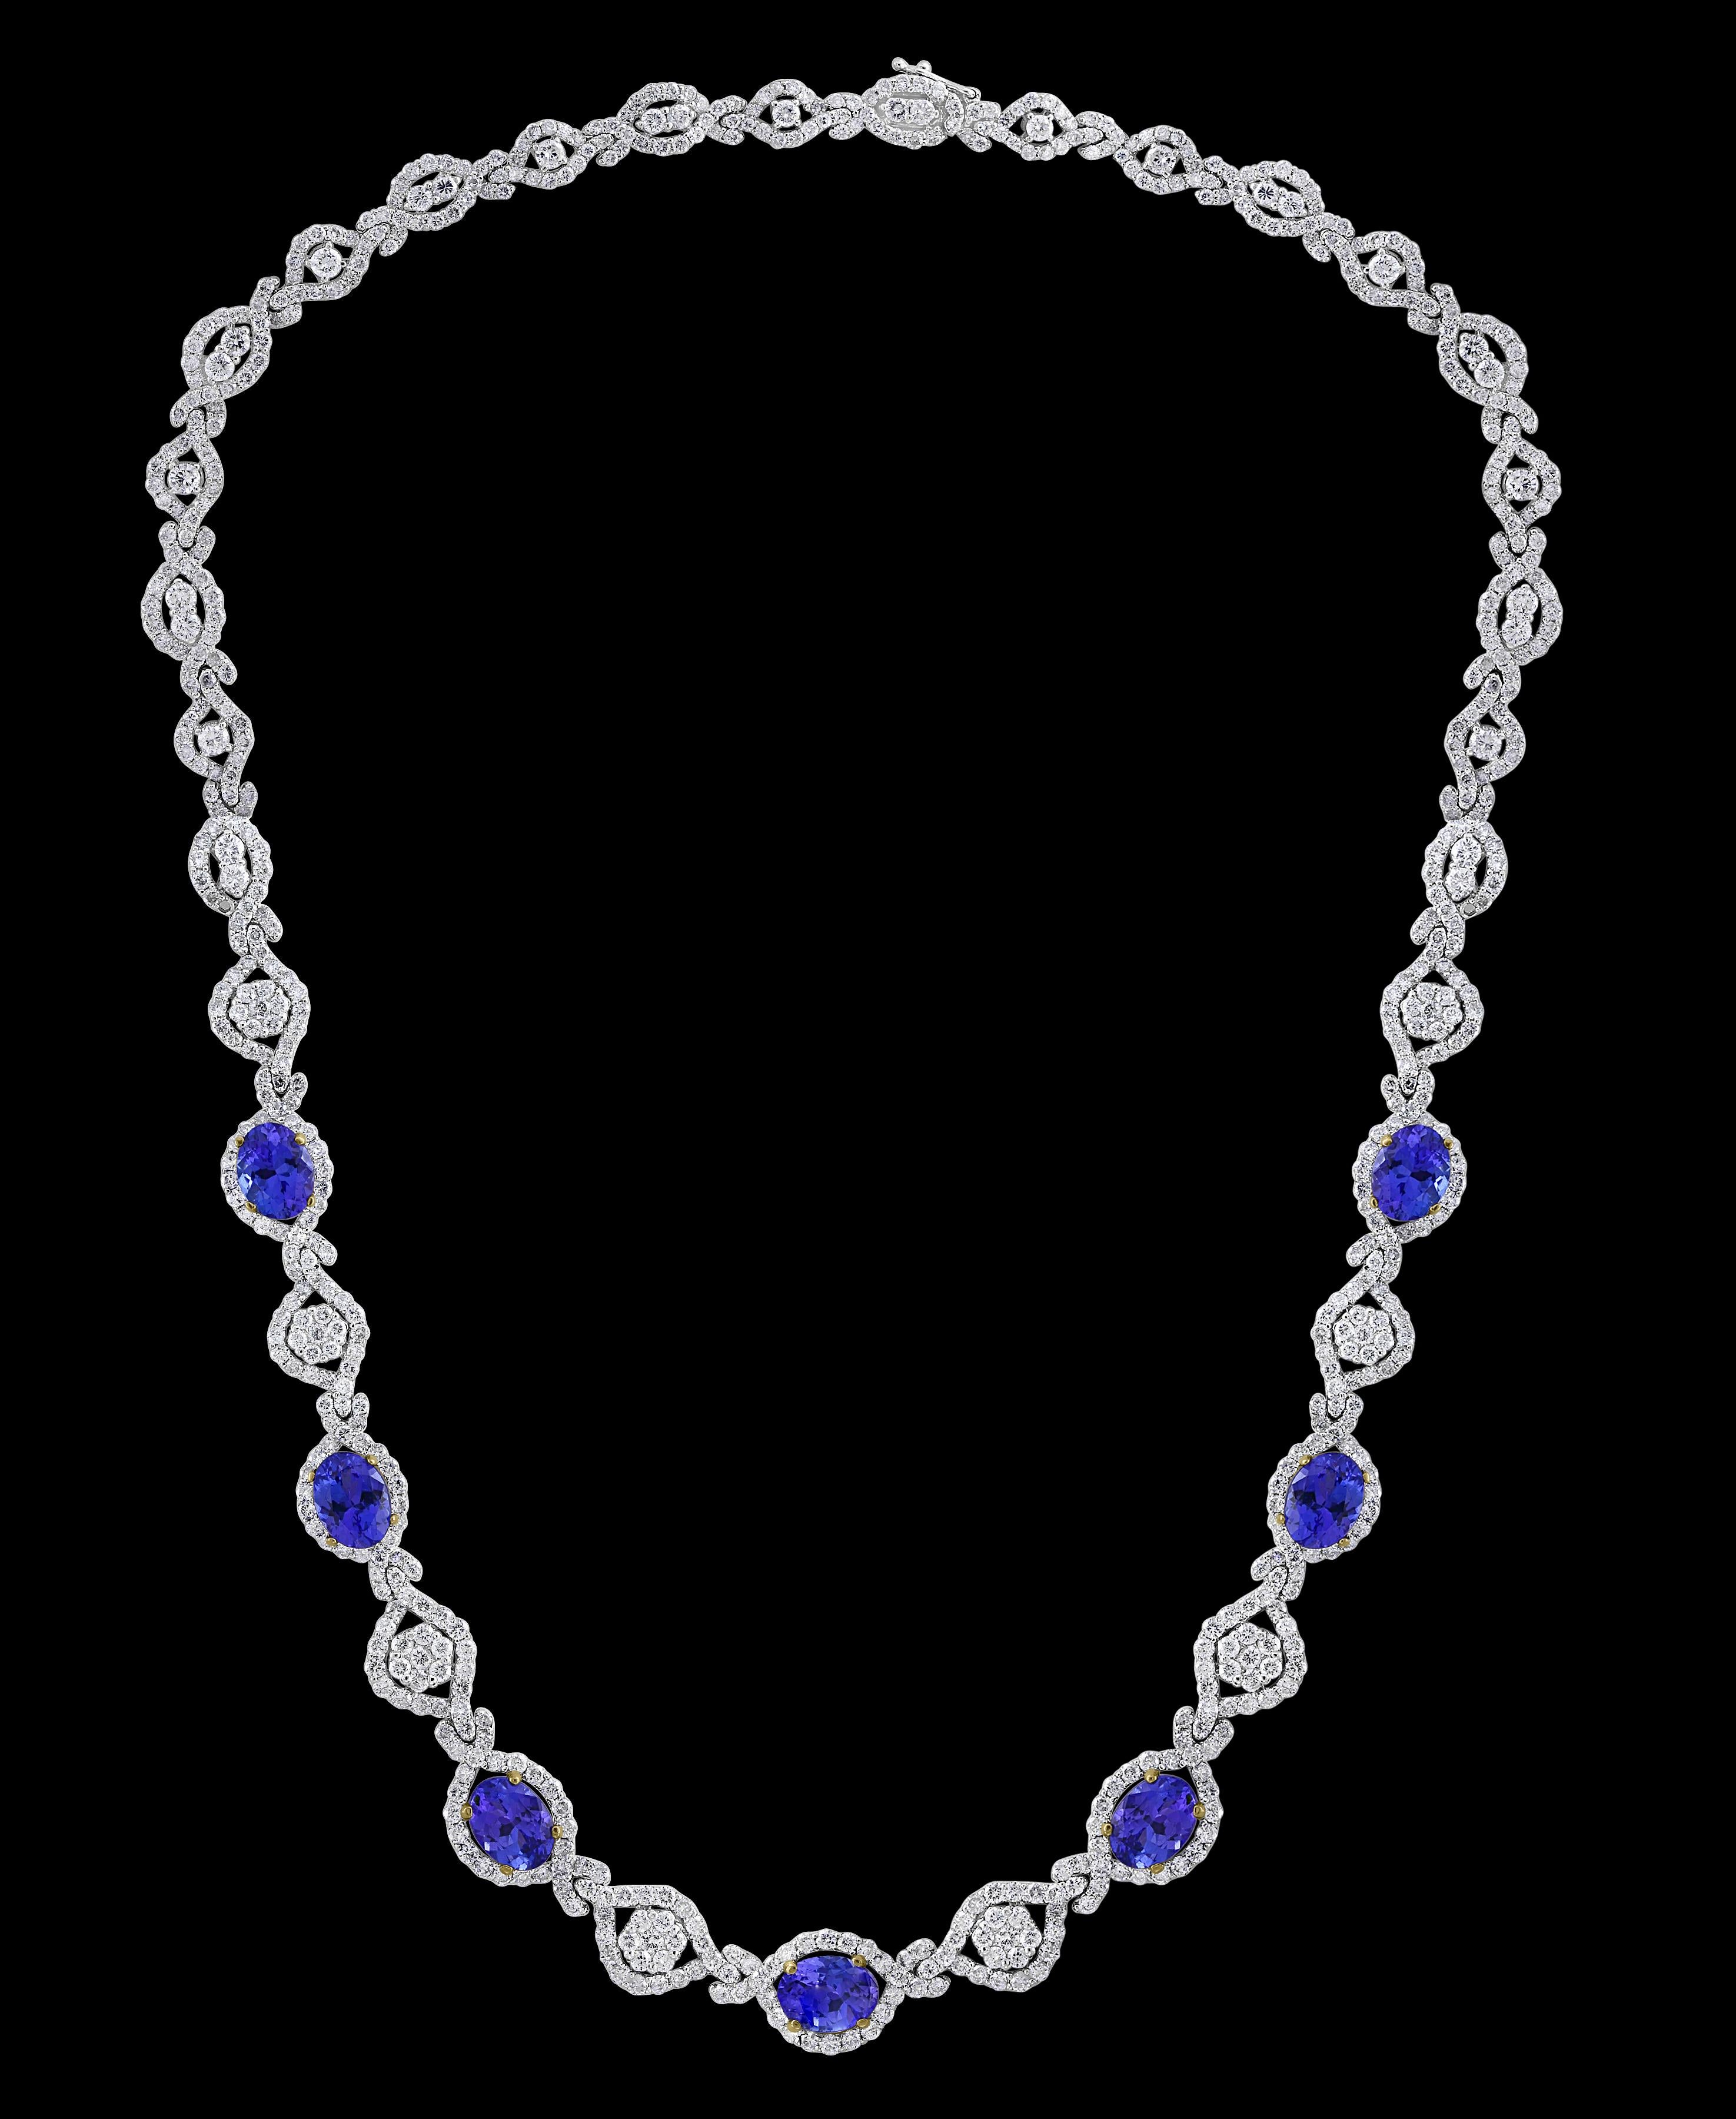 This extraordinary Necklace is consist of 7 Fine oval Tanzanite  weighing approximately 11 Carats. There are  total  of  approximately 13 carats of shimmering white diamonds, 
The clear, intense hue of this tanzanite is the most coveted of all these